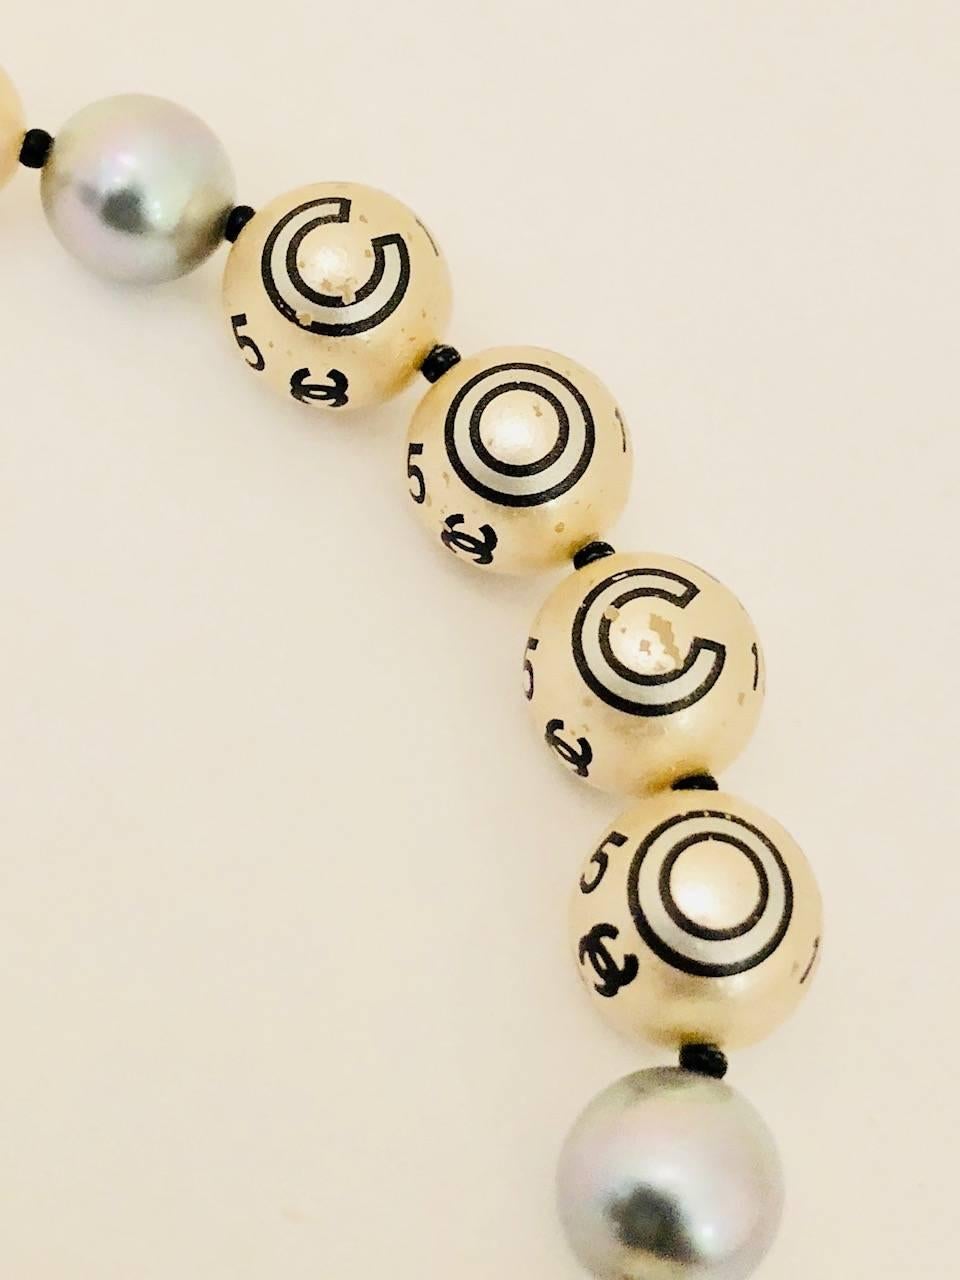 Attention lovers of all items Chanel!  A most unique faux pearl necklace from 2005.  Pearls range in size from 6mm to 11mm along with three grey pearls 8mm each.  This rare piece is distinguished by the fact that pearls are printed!  One side spells